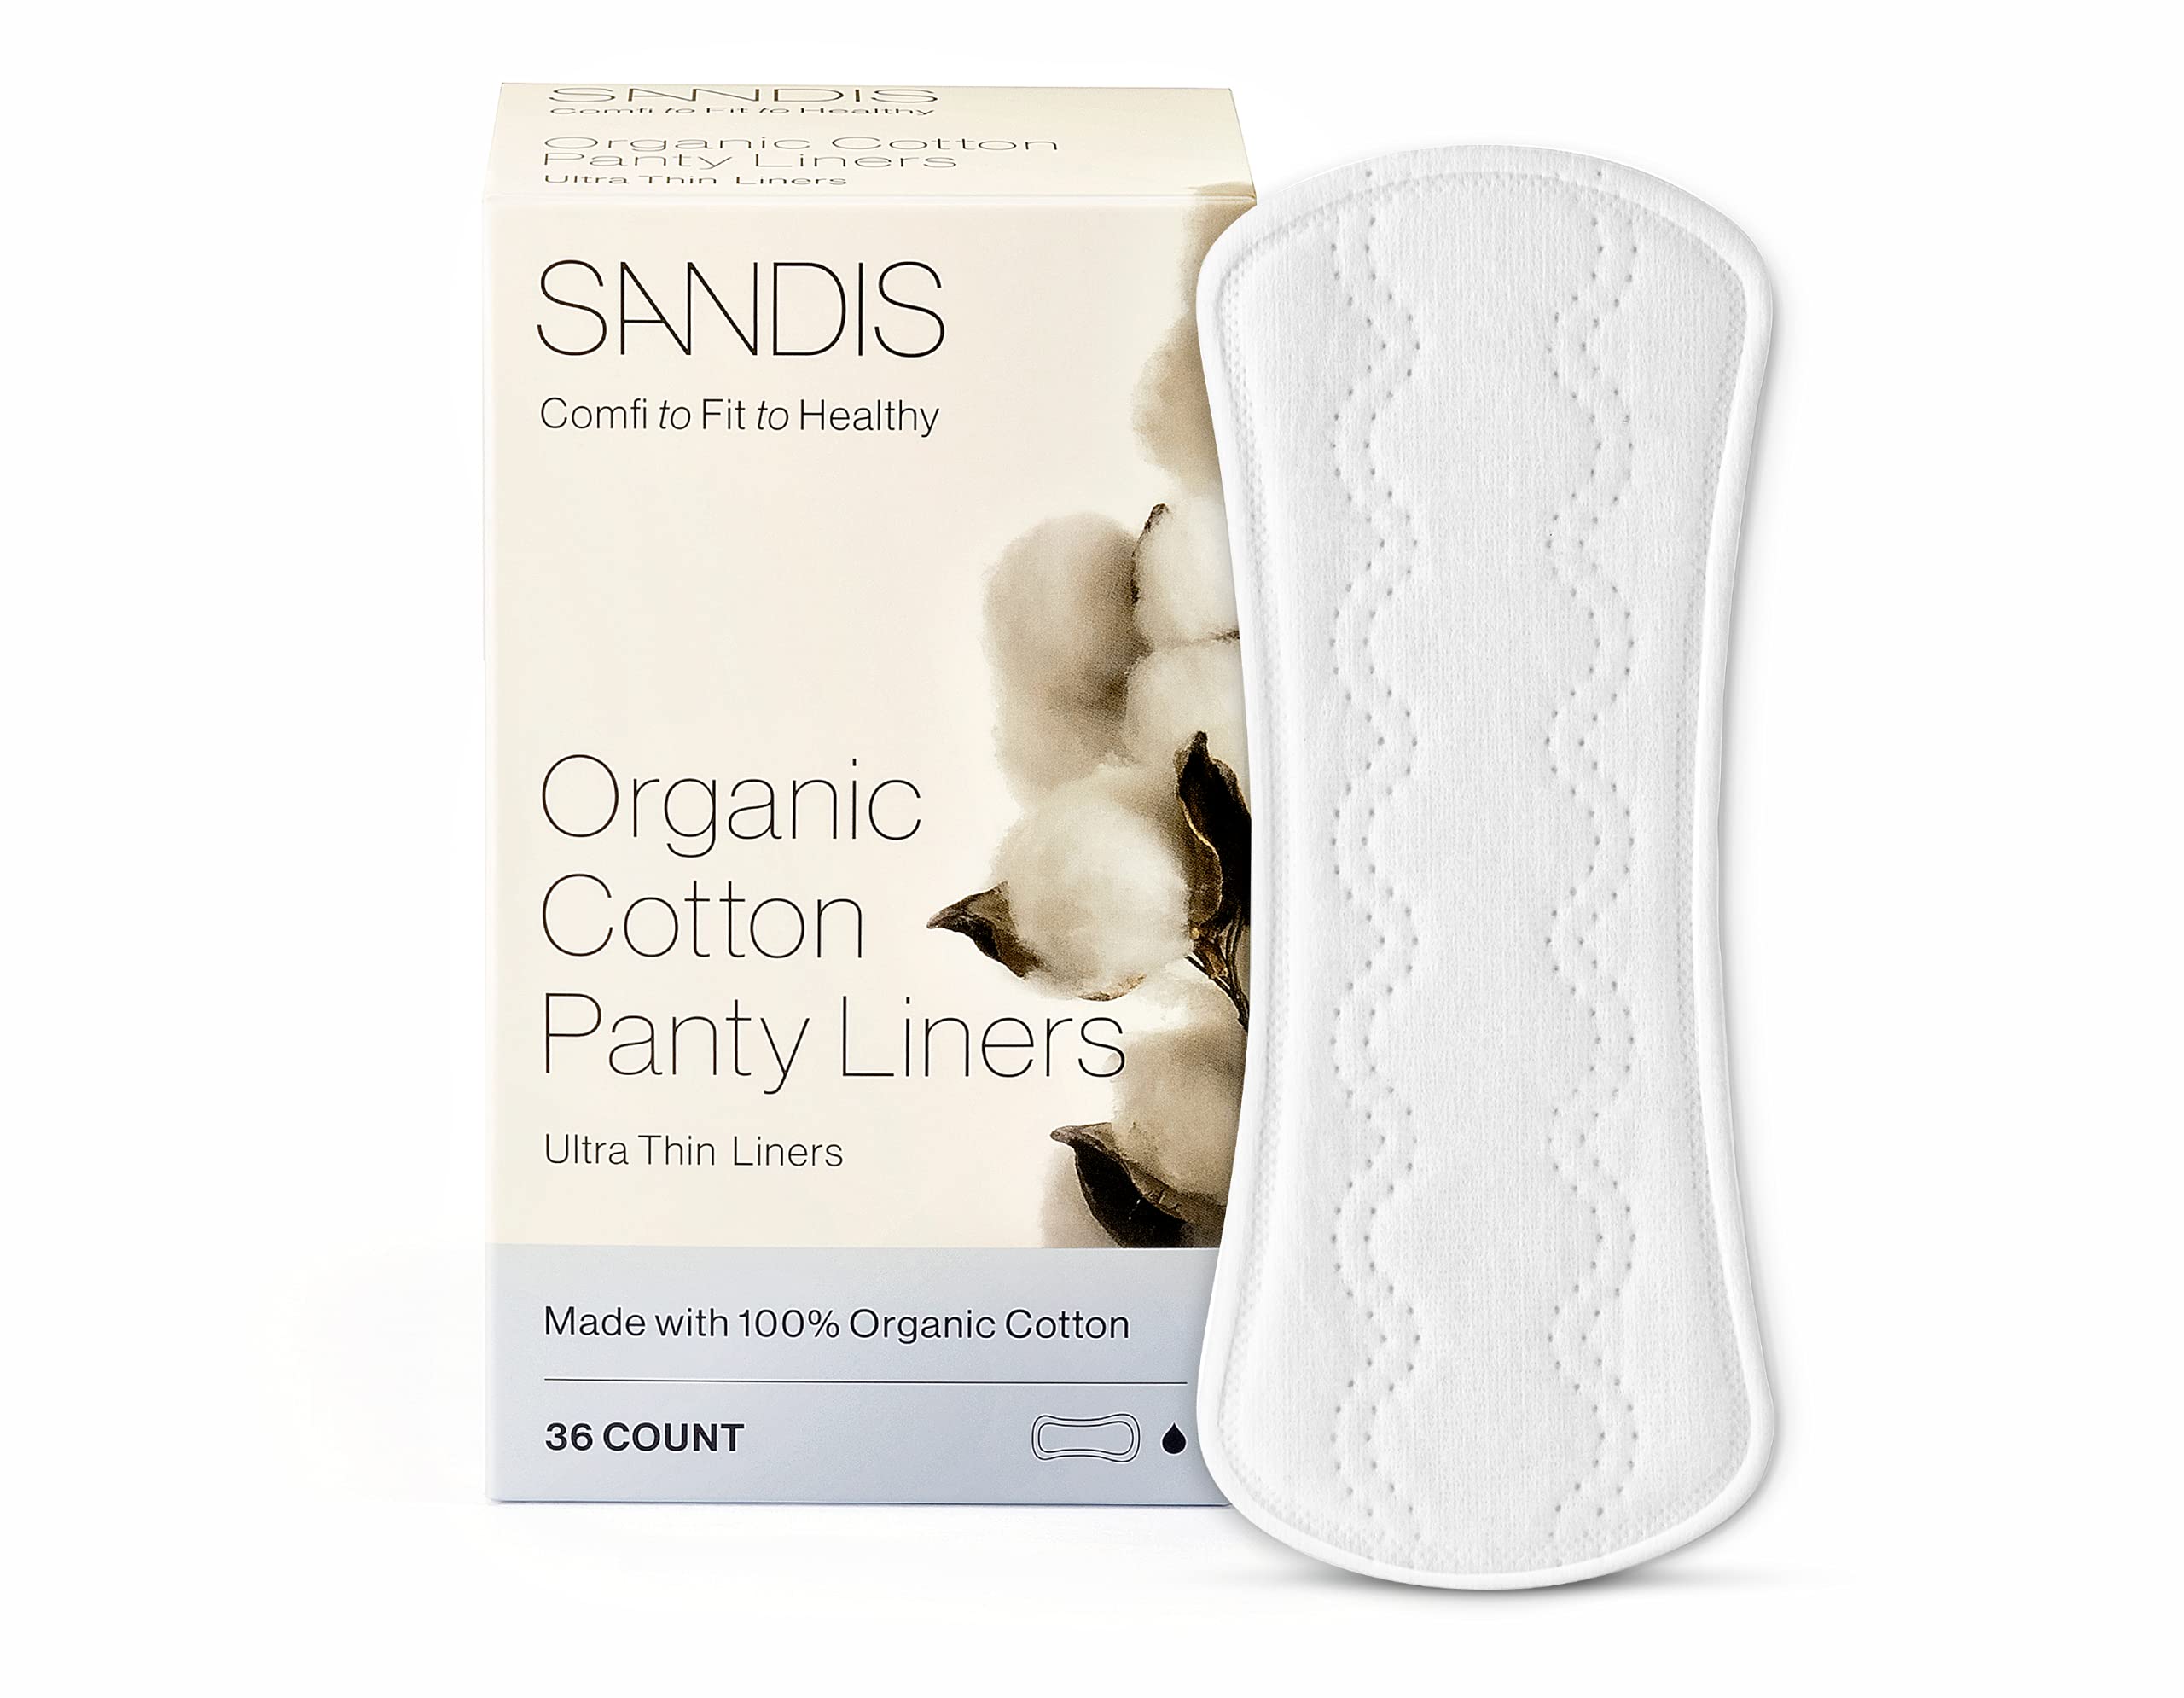  Ultra Thin Liners, 108 Count - Cotton Panty Liners